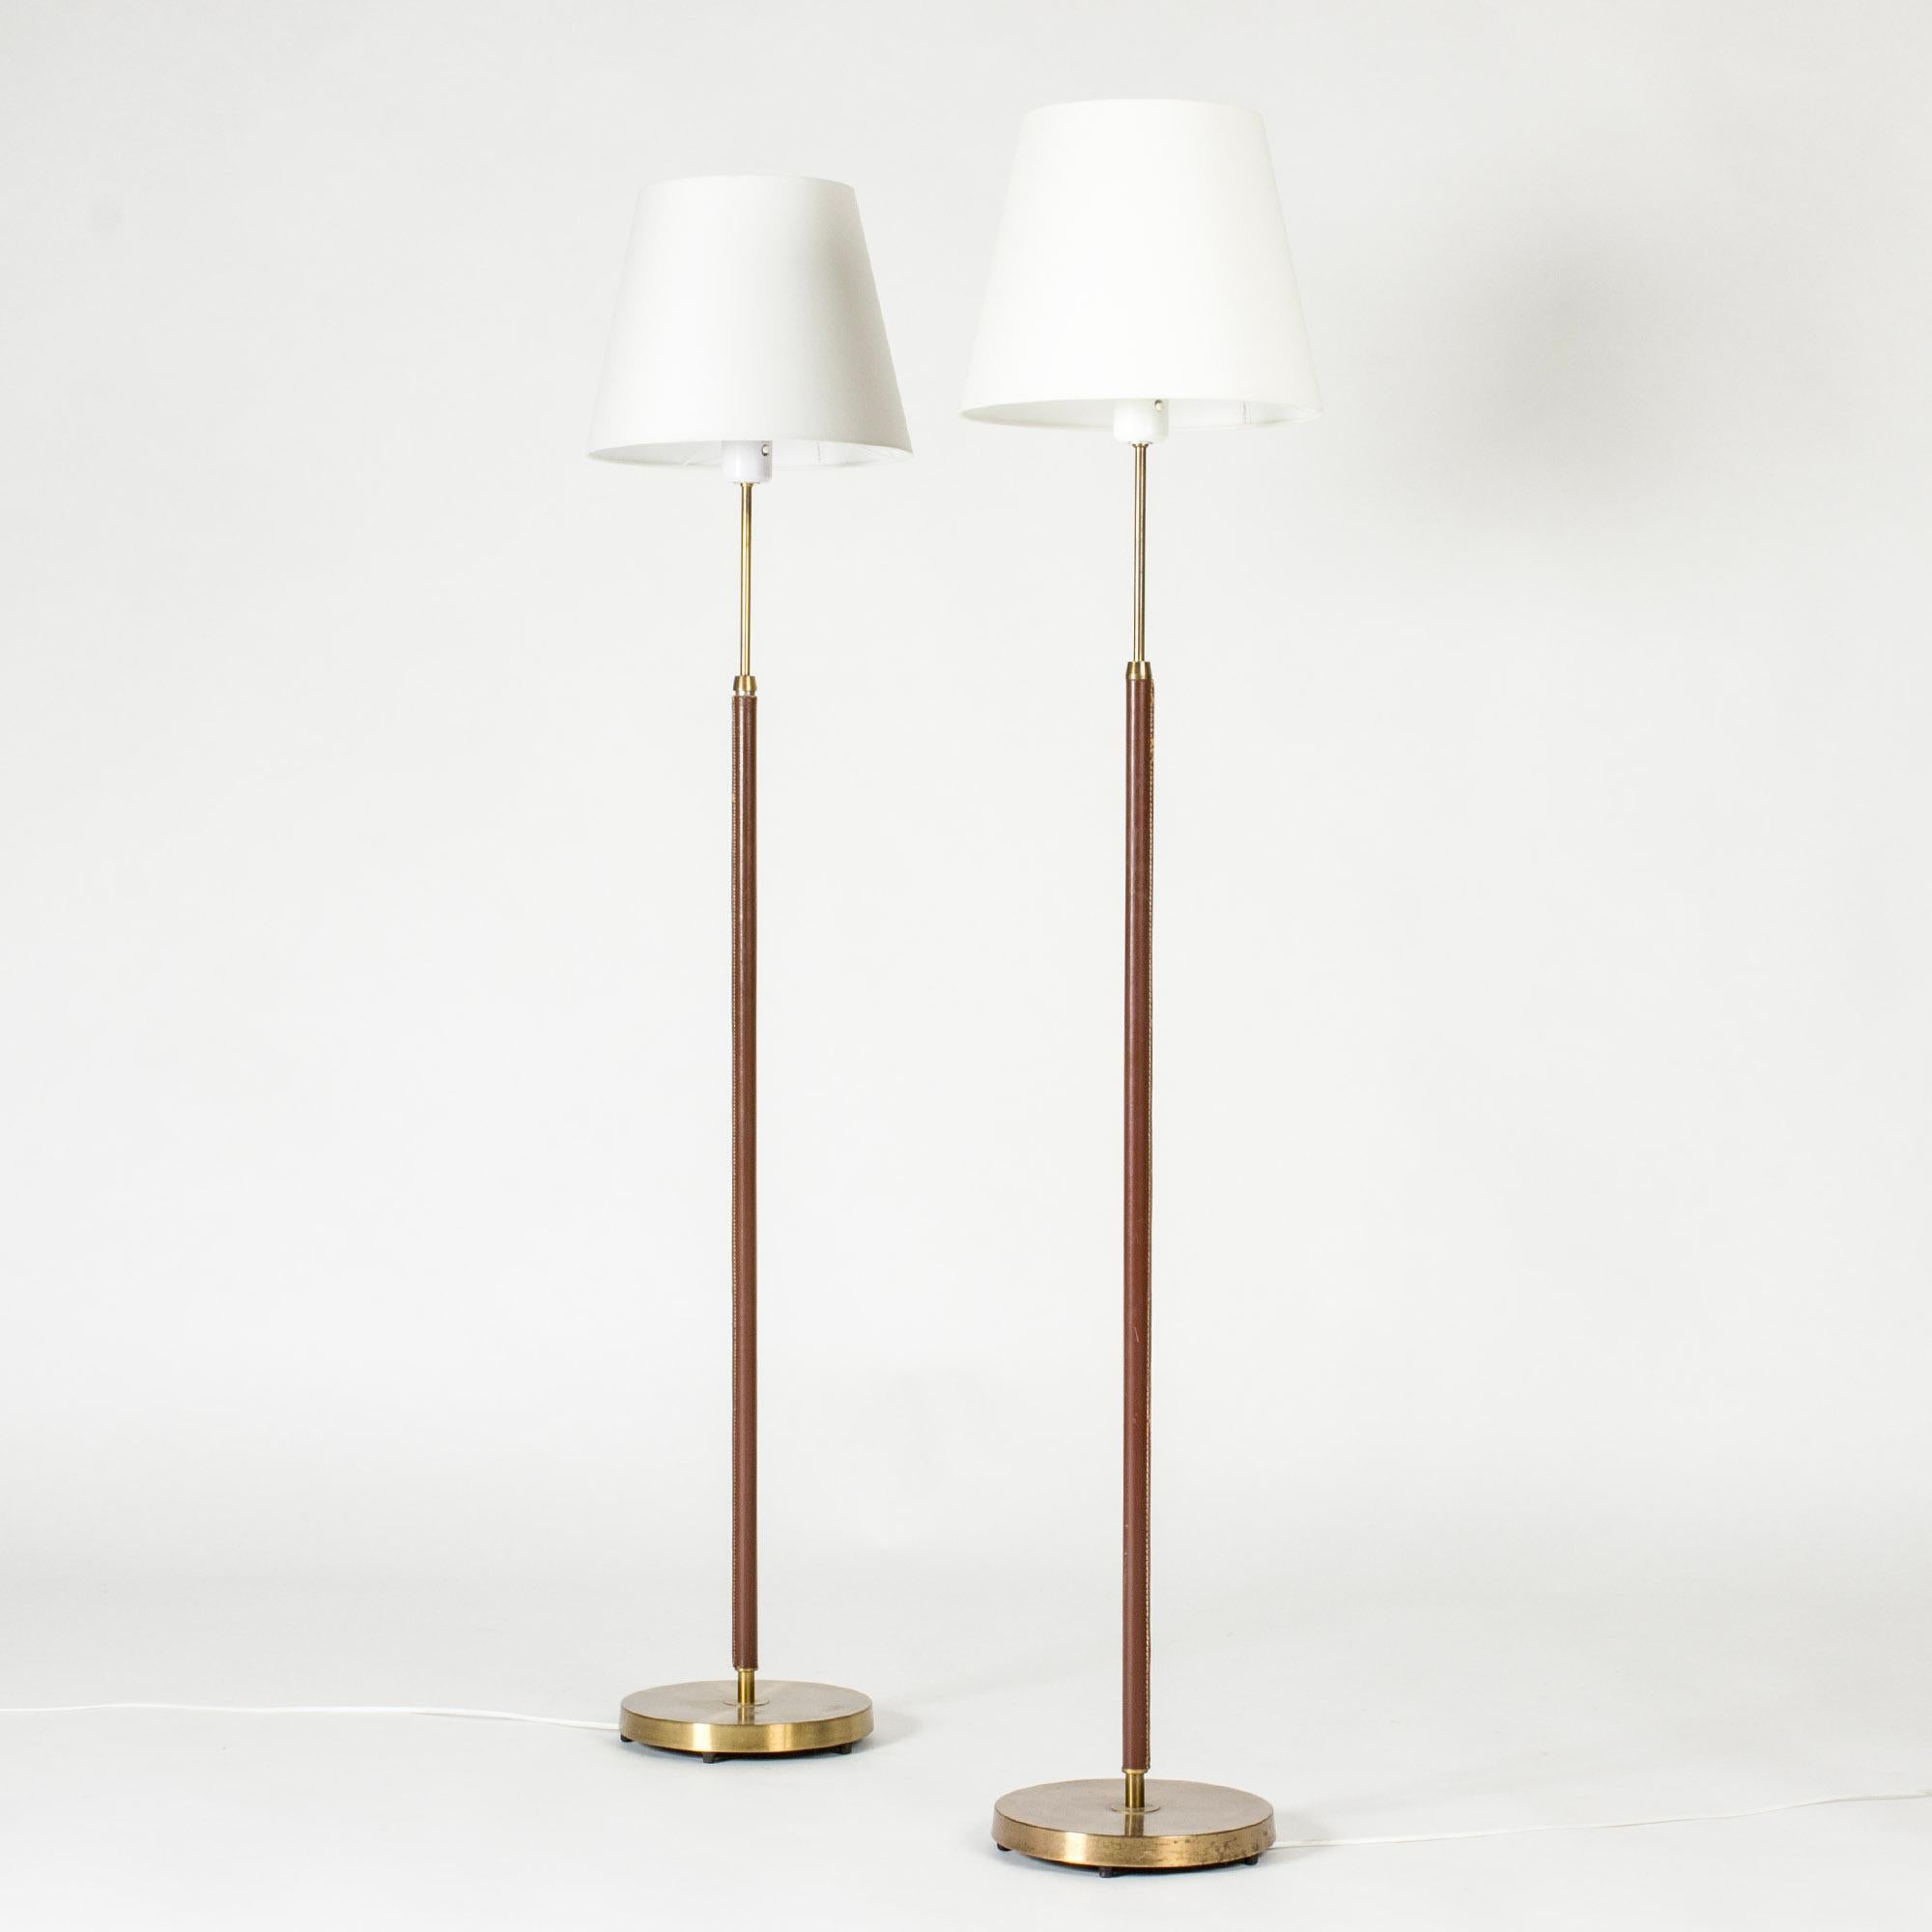 Pair of elegant floor lamps from Falkenbergs Belysning, made from brass. Sleek stems dressed with reddish brown leather, decorative white seams.